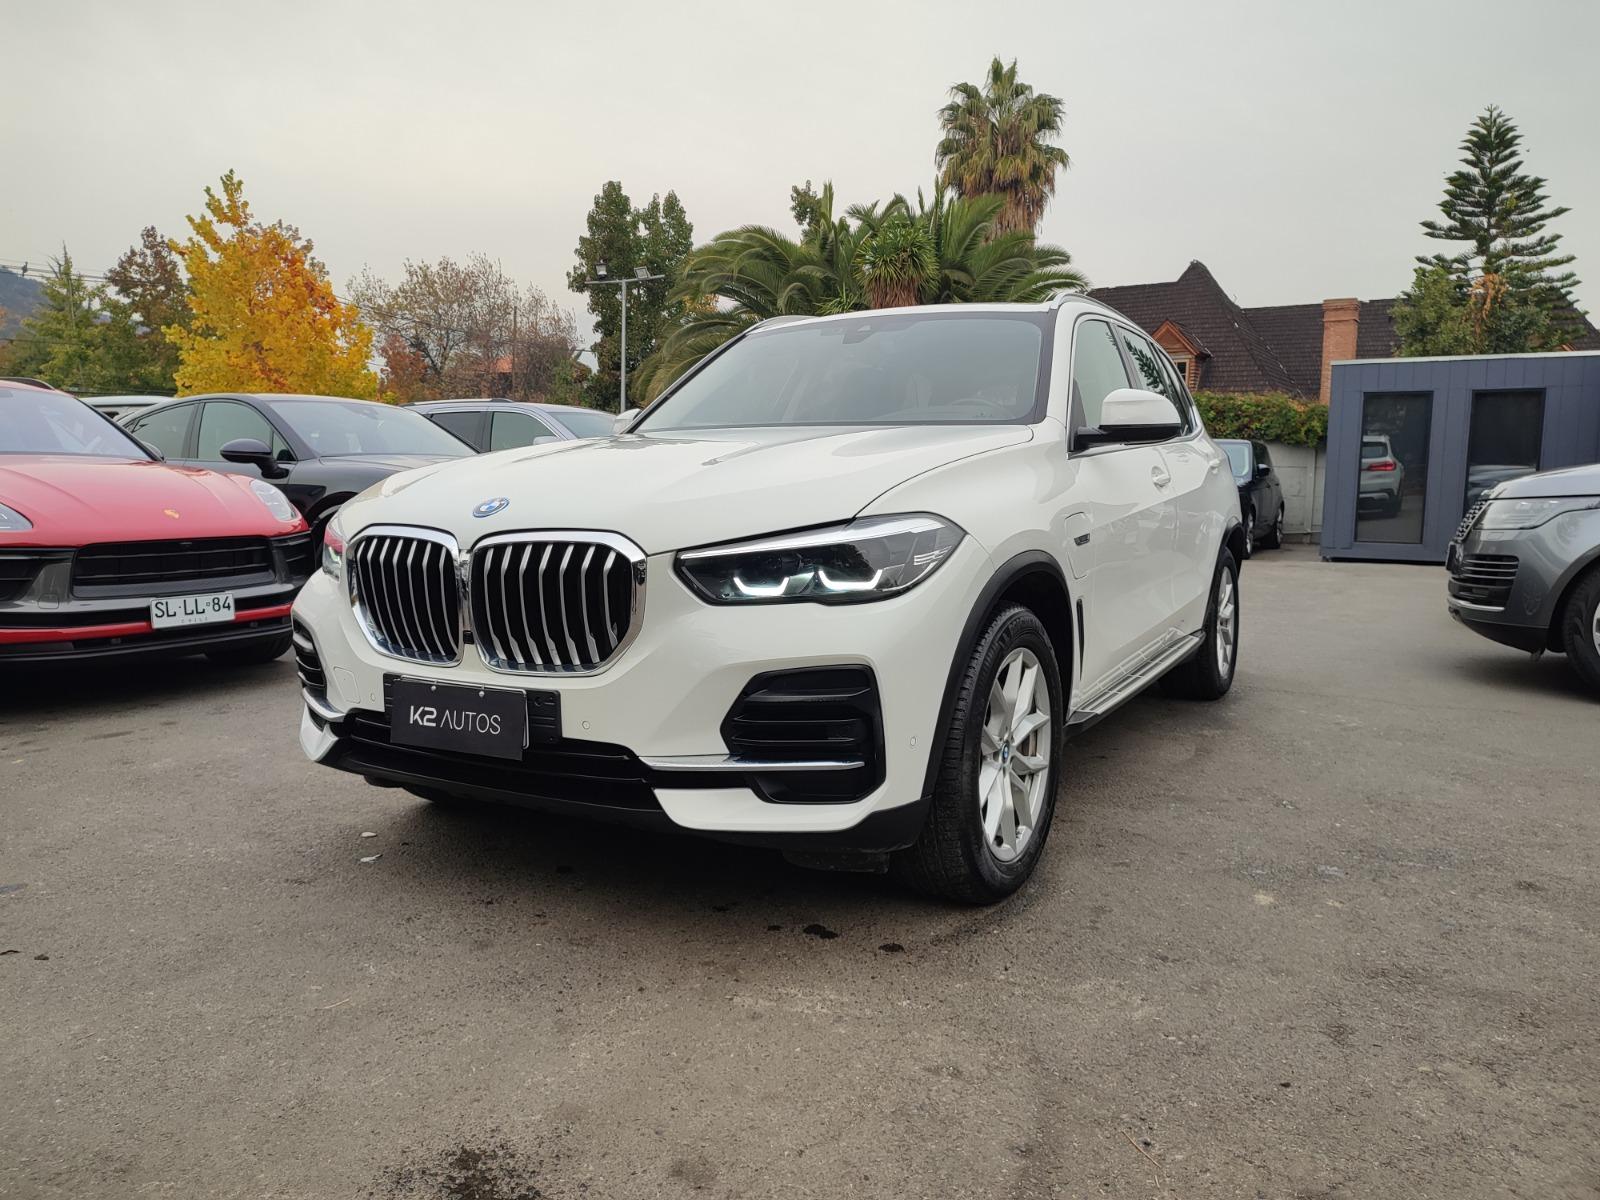 BMW X5 XDRIVE 45E 3.0 HERITAGE 2022 HIBRIDO ENCHUFABLE, IMPECABLE - FULL MOTOR